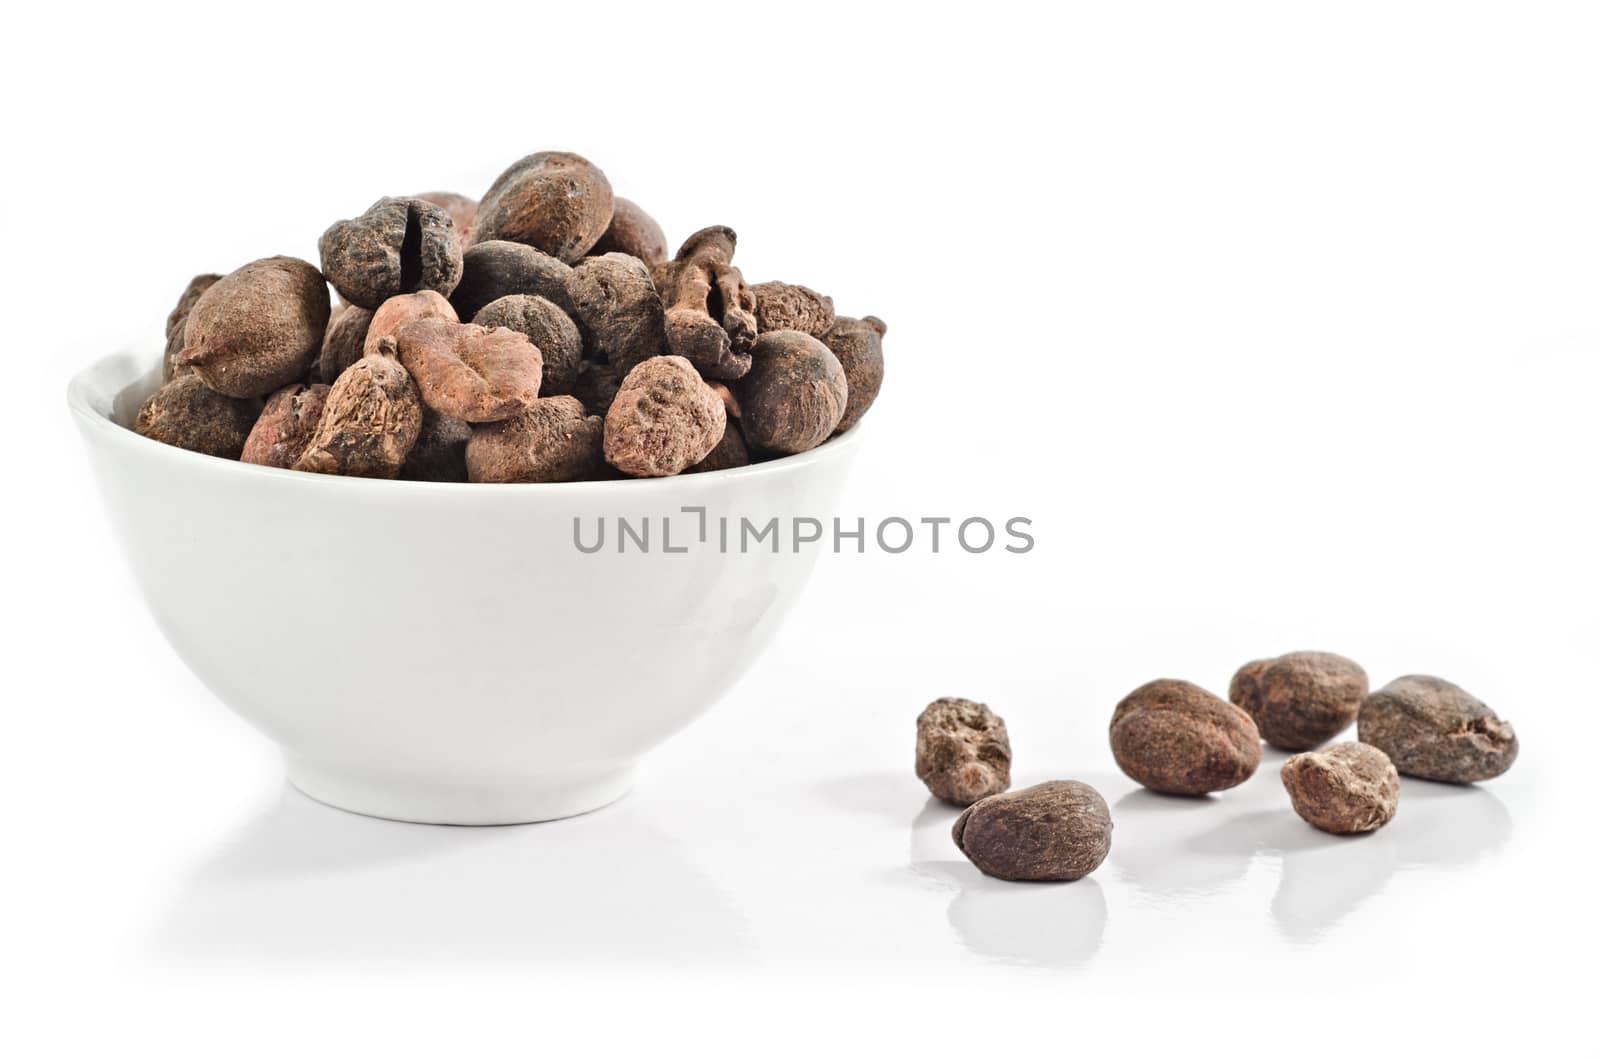 Cup full of shea nuts by luisapuccini